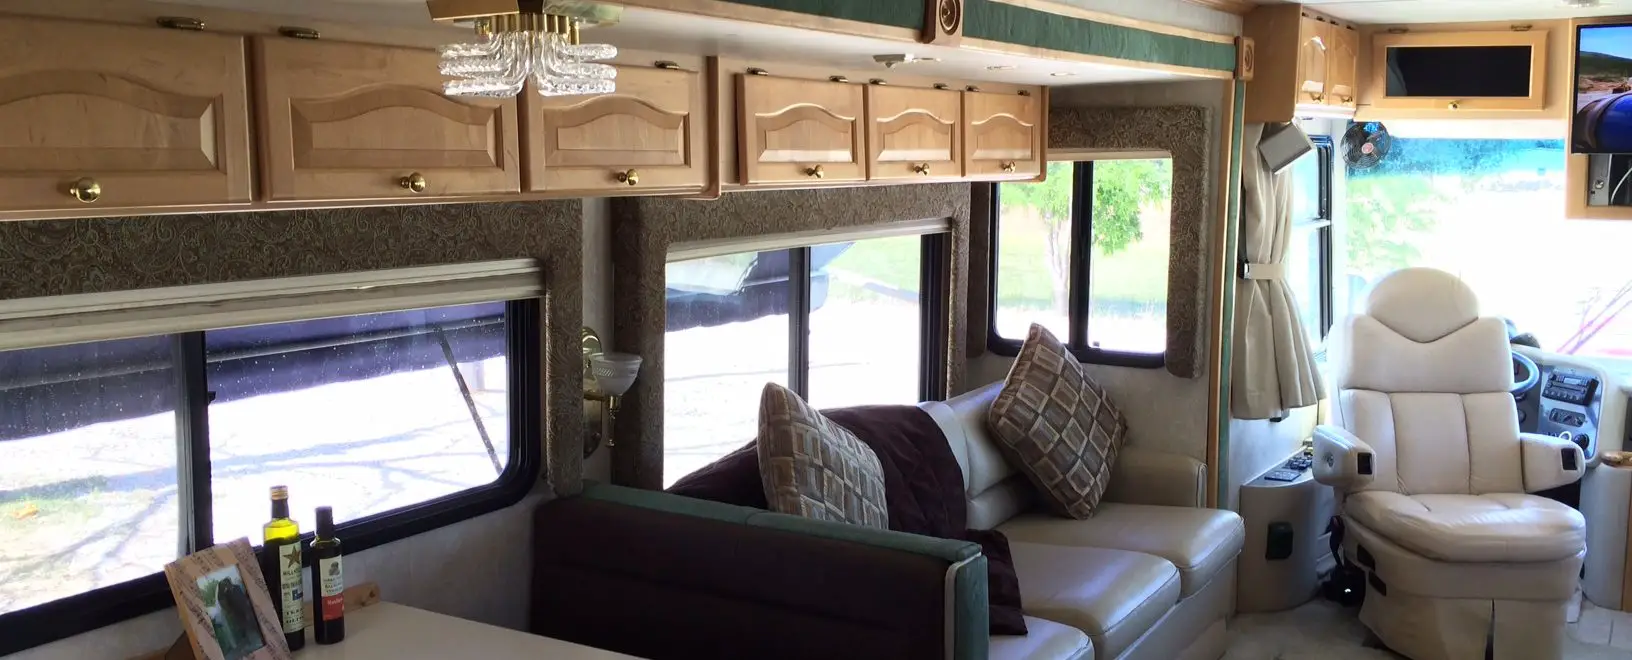 RV Dining and Living Areas